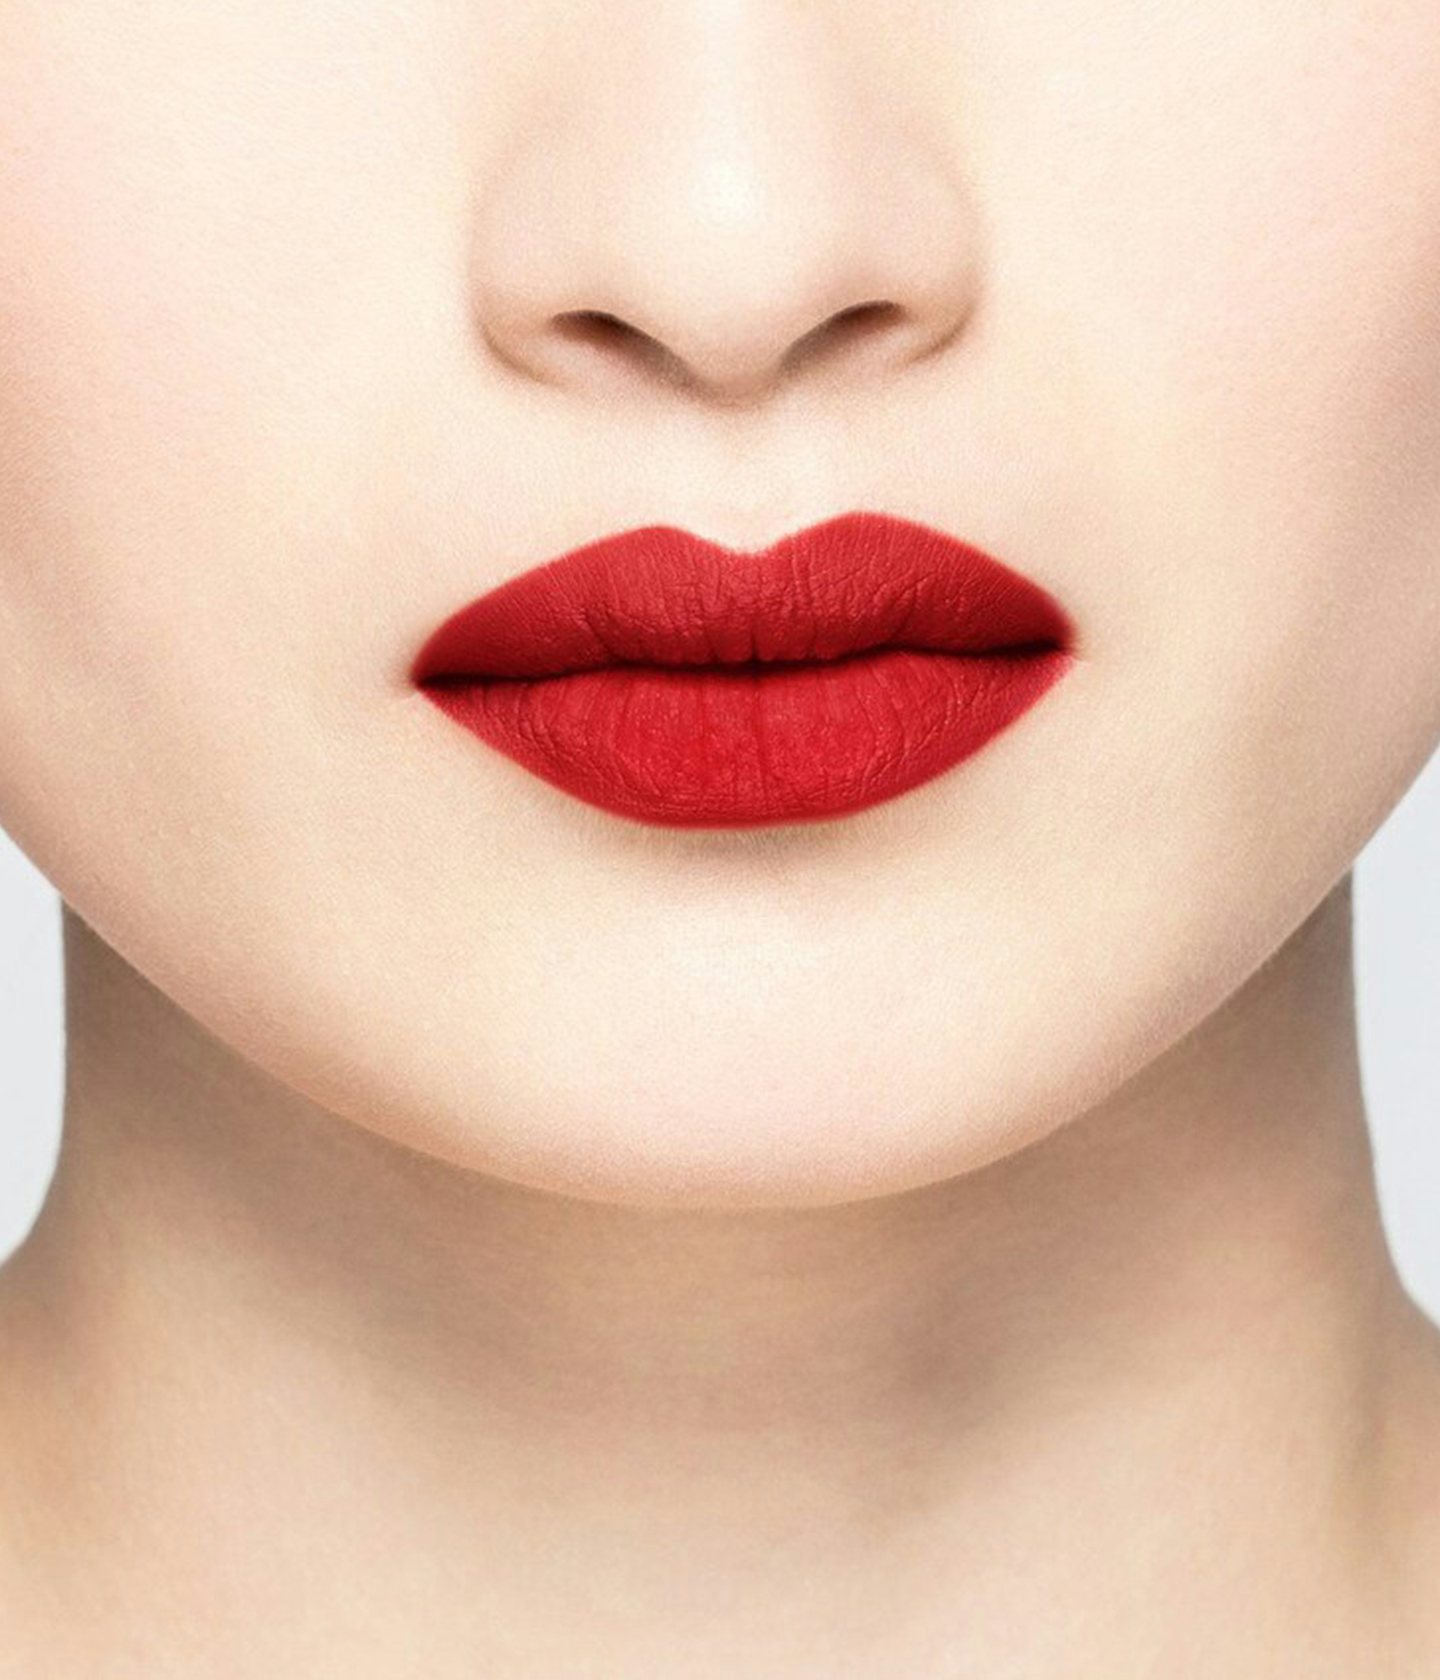 La bouche rouge Le Rouge Self Service lipstick shade on the lips of an Asian model